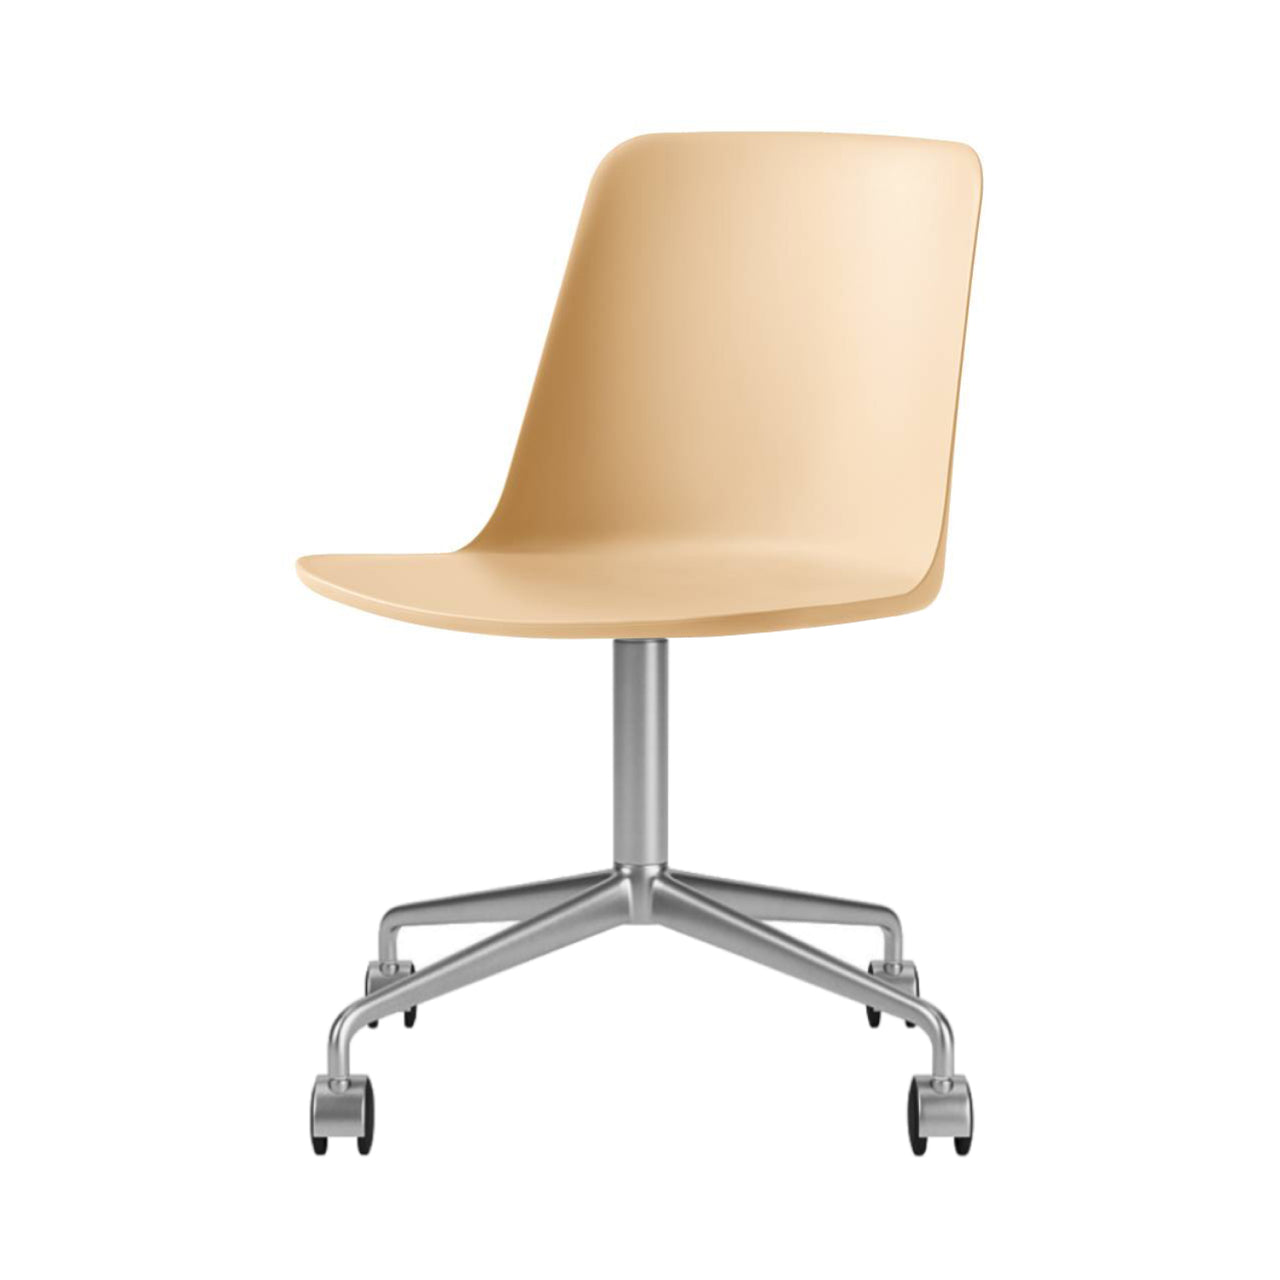 Rely Chair HW21: Beige Sand + Polished Aluminum